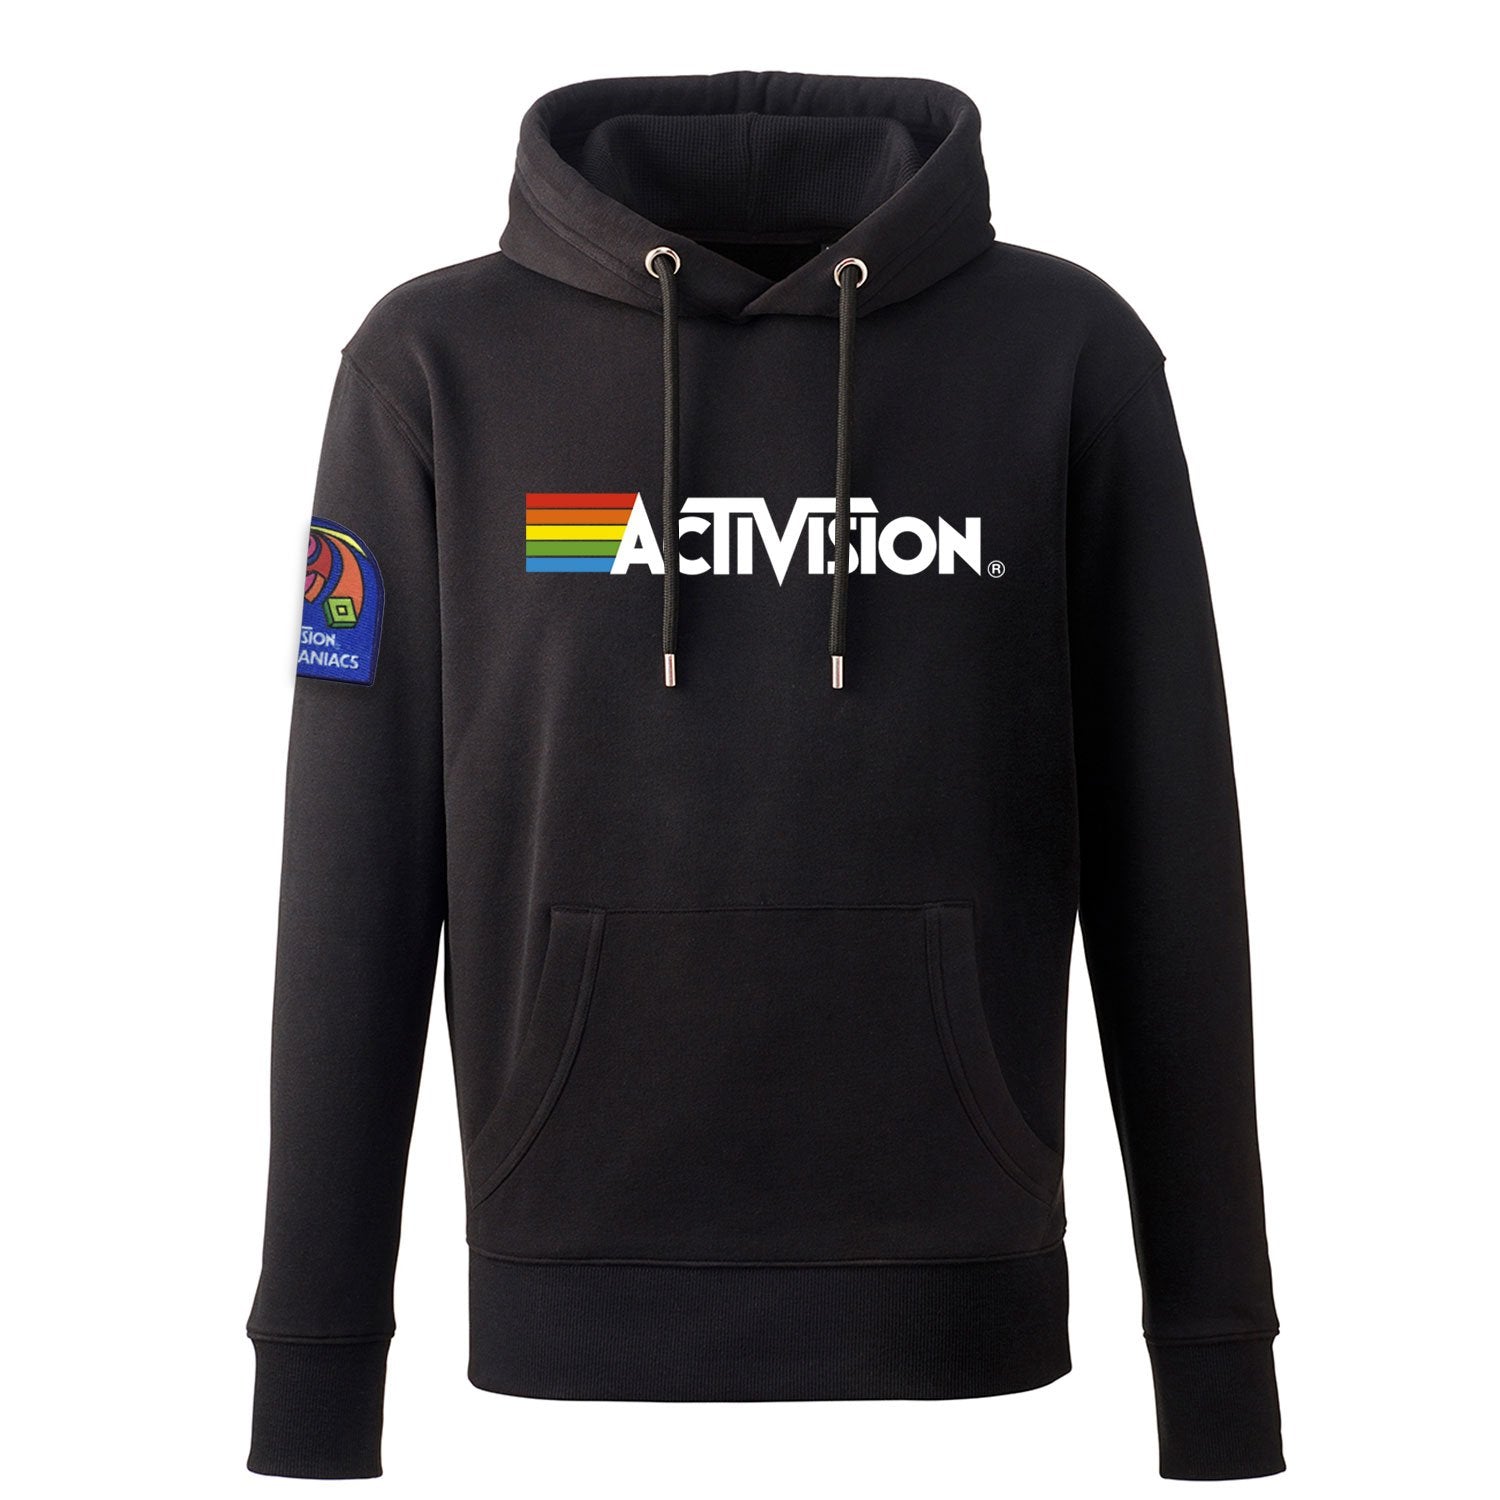 Megamaniacs Patch, Activision Logo Men's Hoody, Black Pullover in Unisex Fit with Kangaroo Pocket